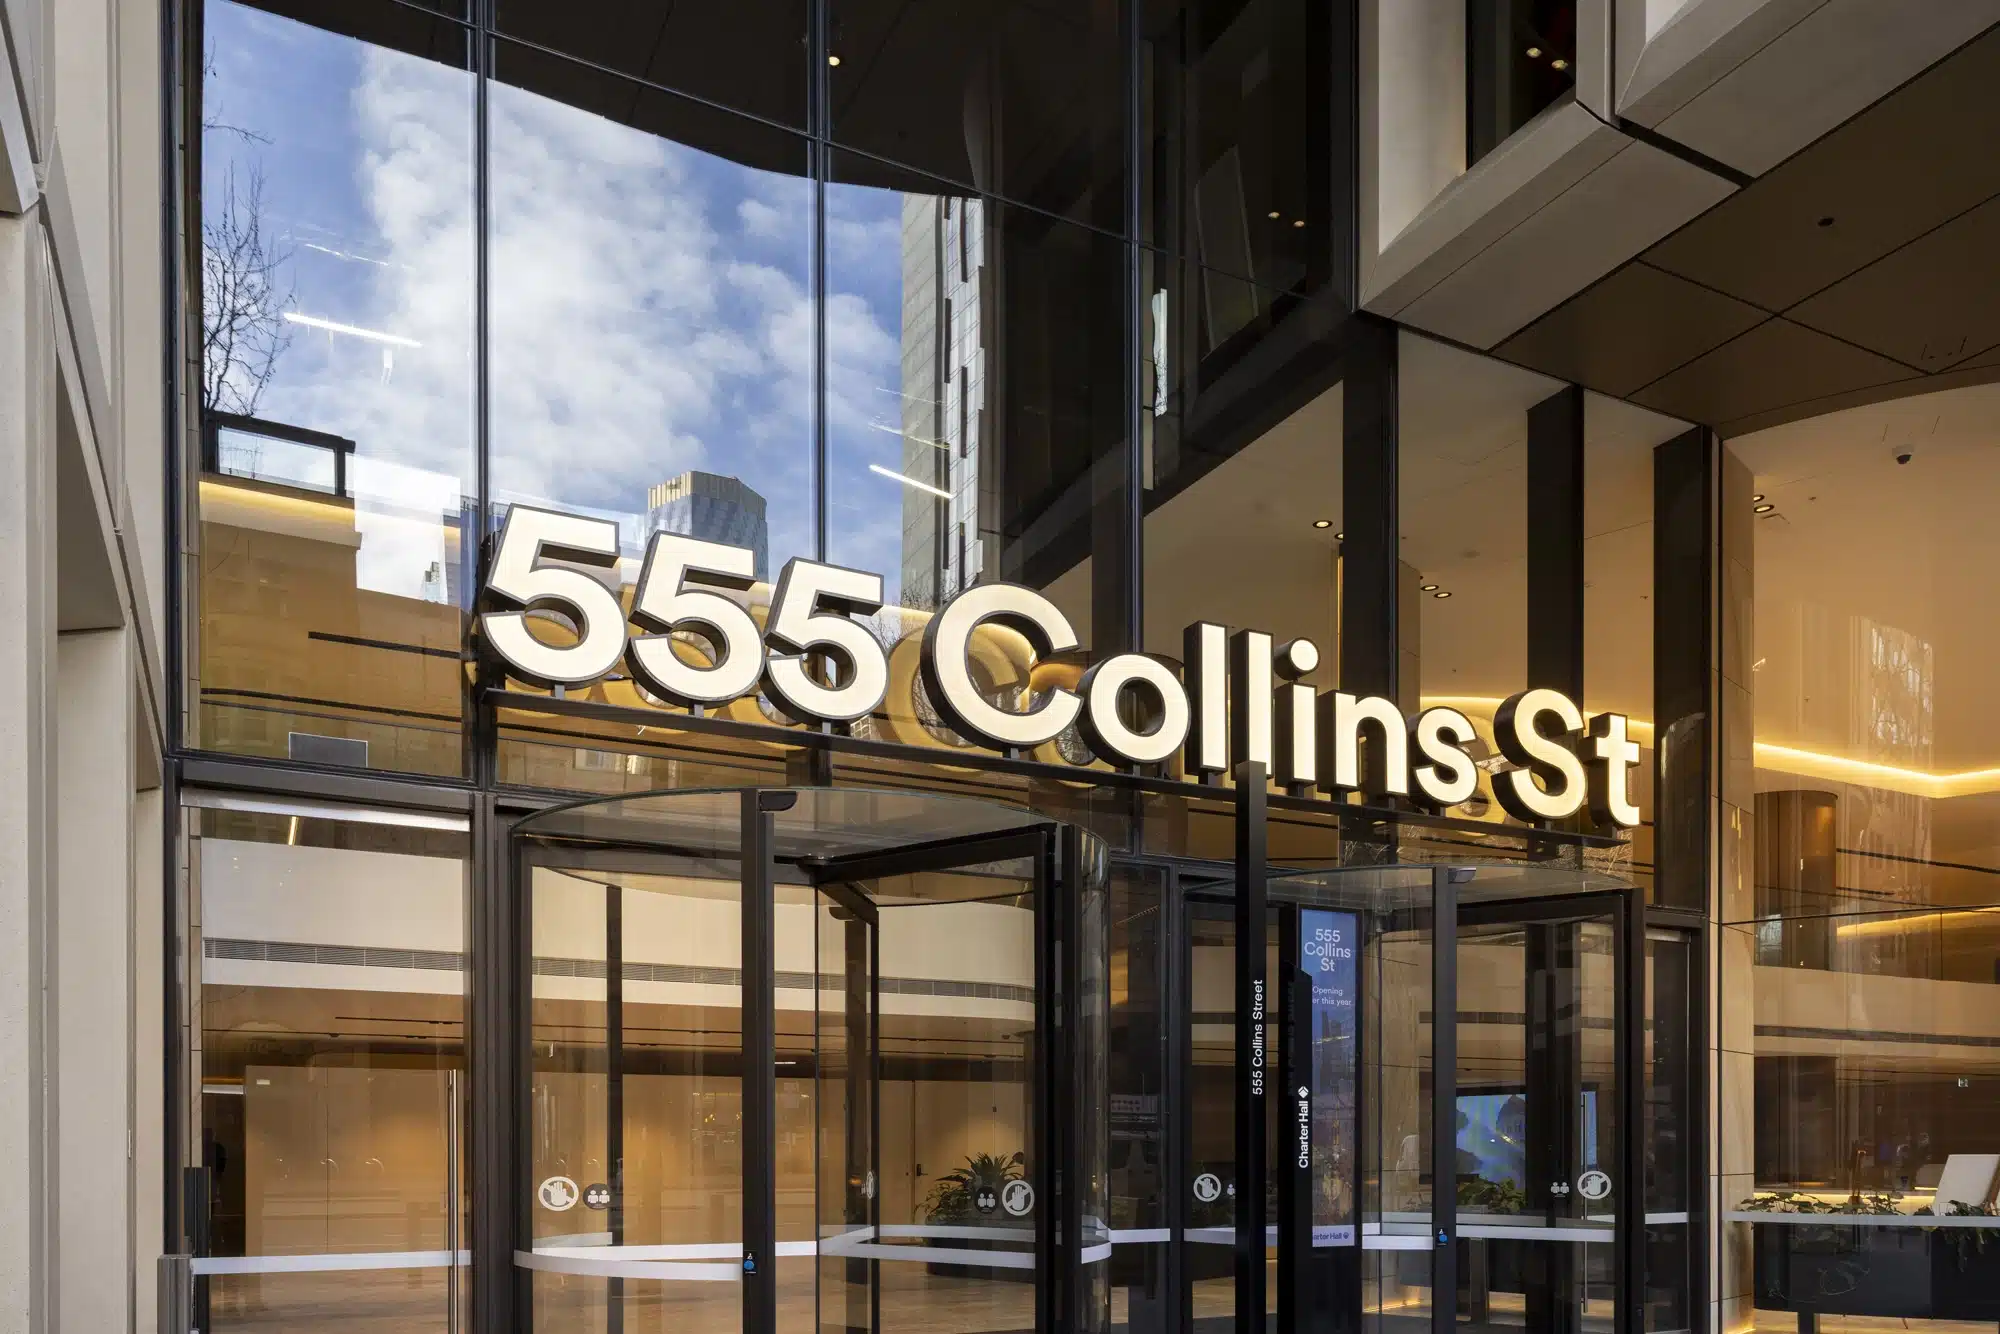 Local area guide: 555 Collins ExChange